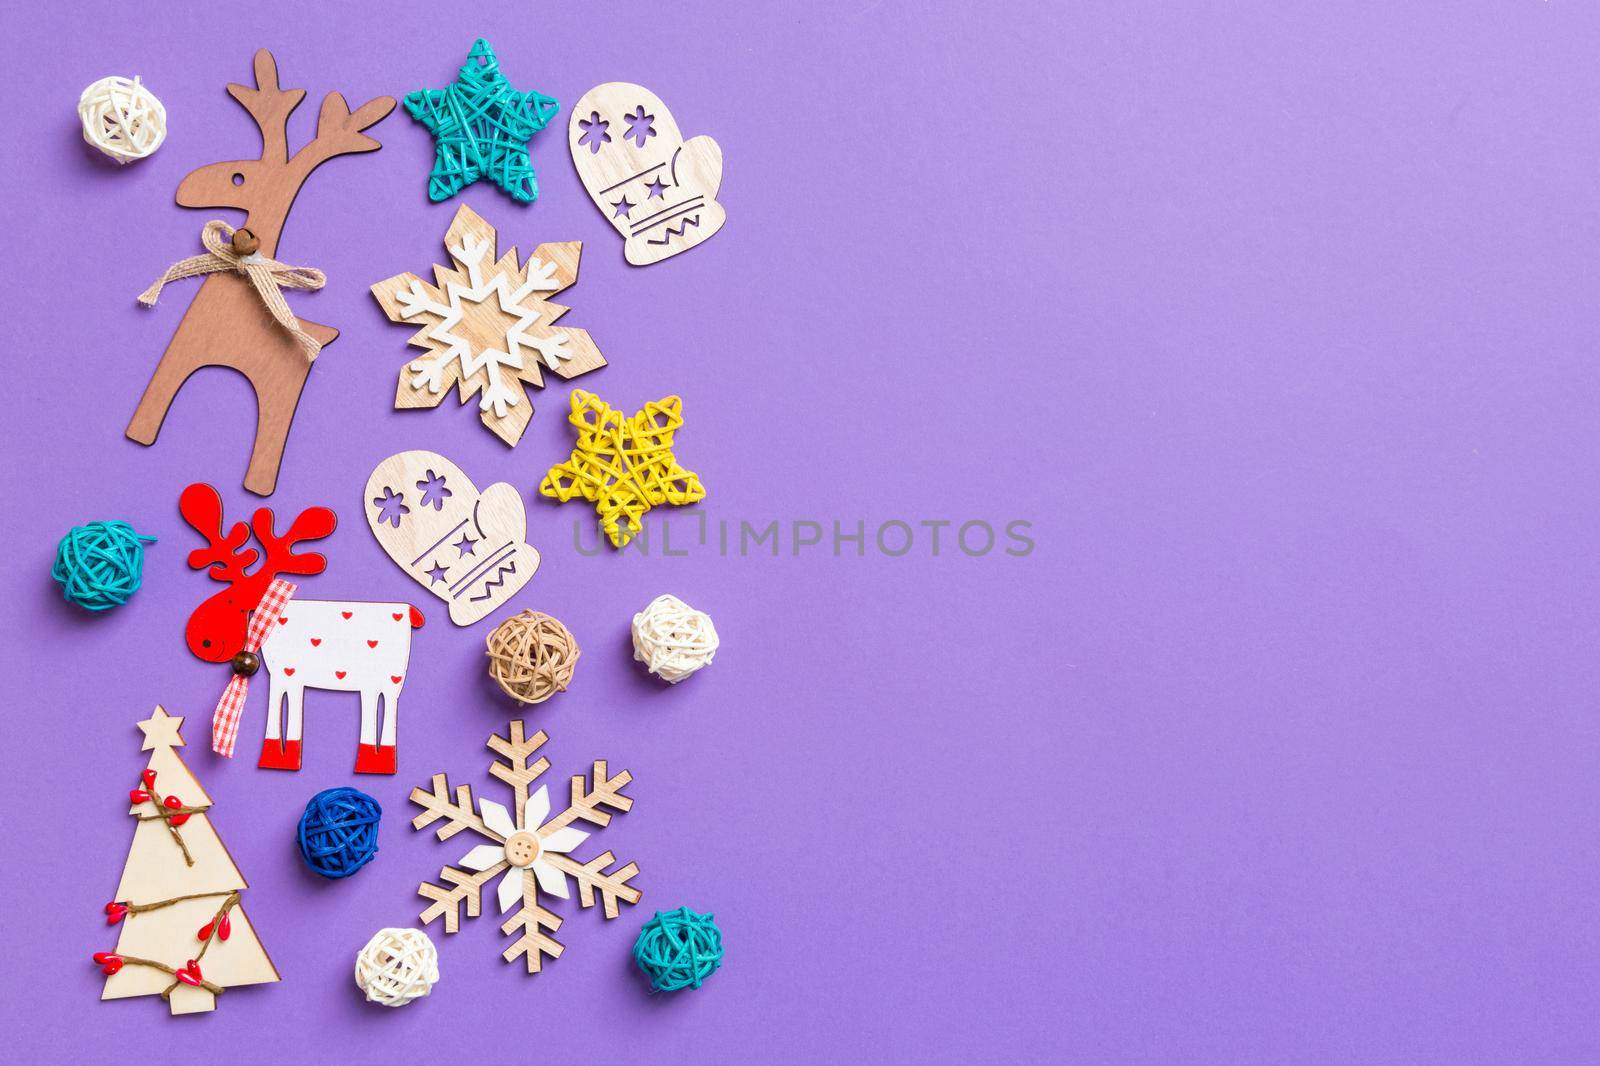 Festive decorations and toys on purple background. Merry Christmas concept with copy space.